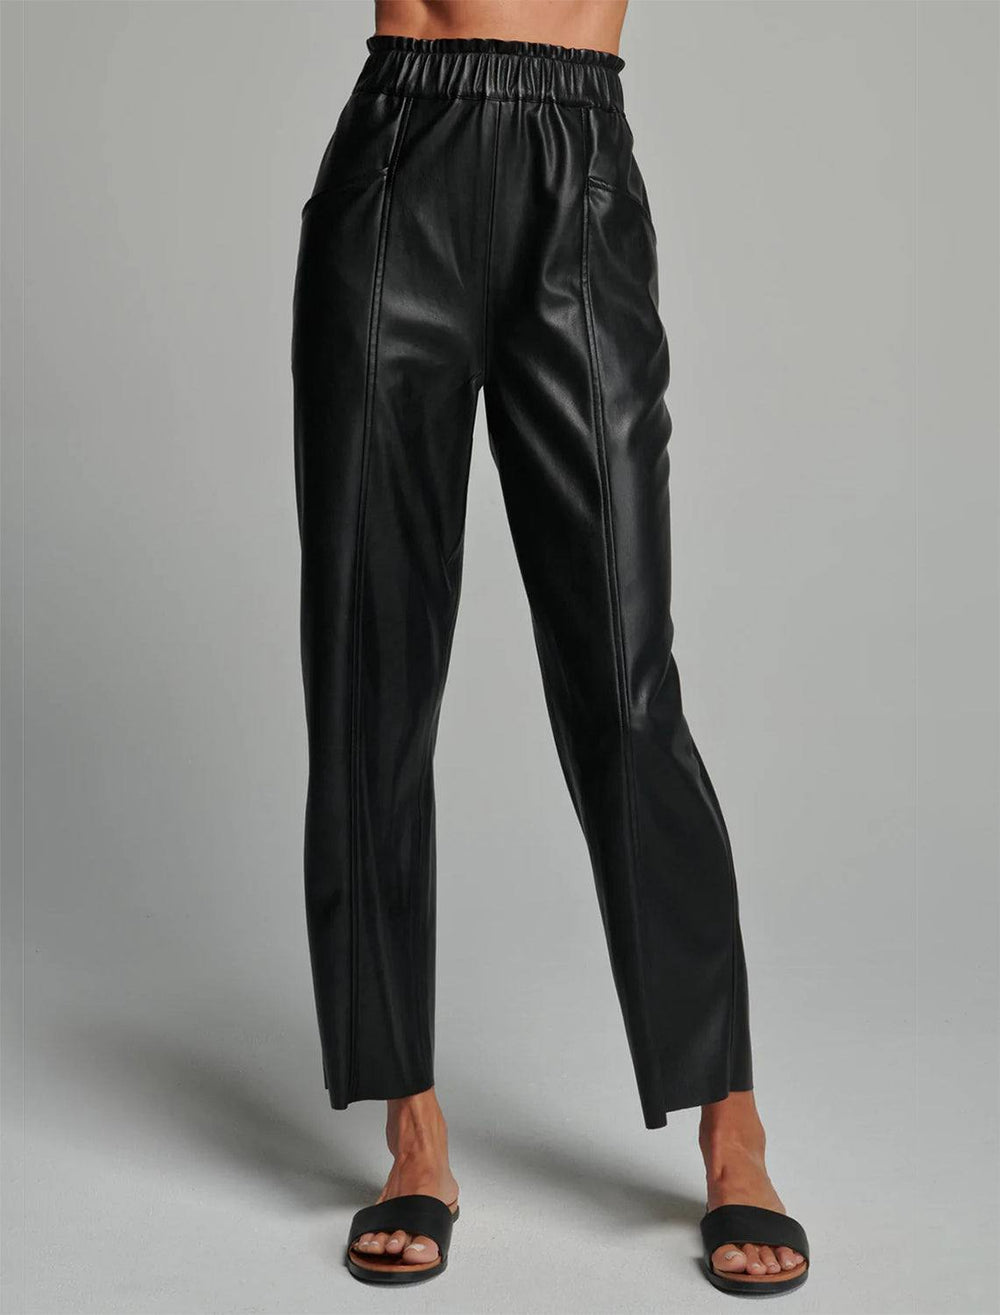 Model wearing Sunday NYC's Harper Pant in Black Vegan Leather. Model pairs the pants with black sandals.